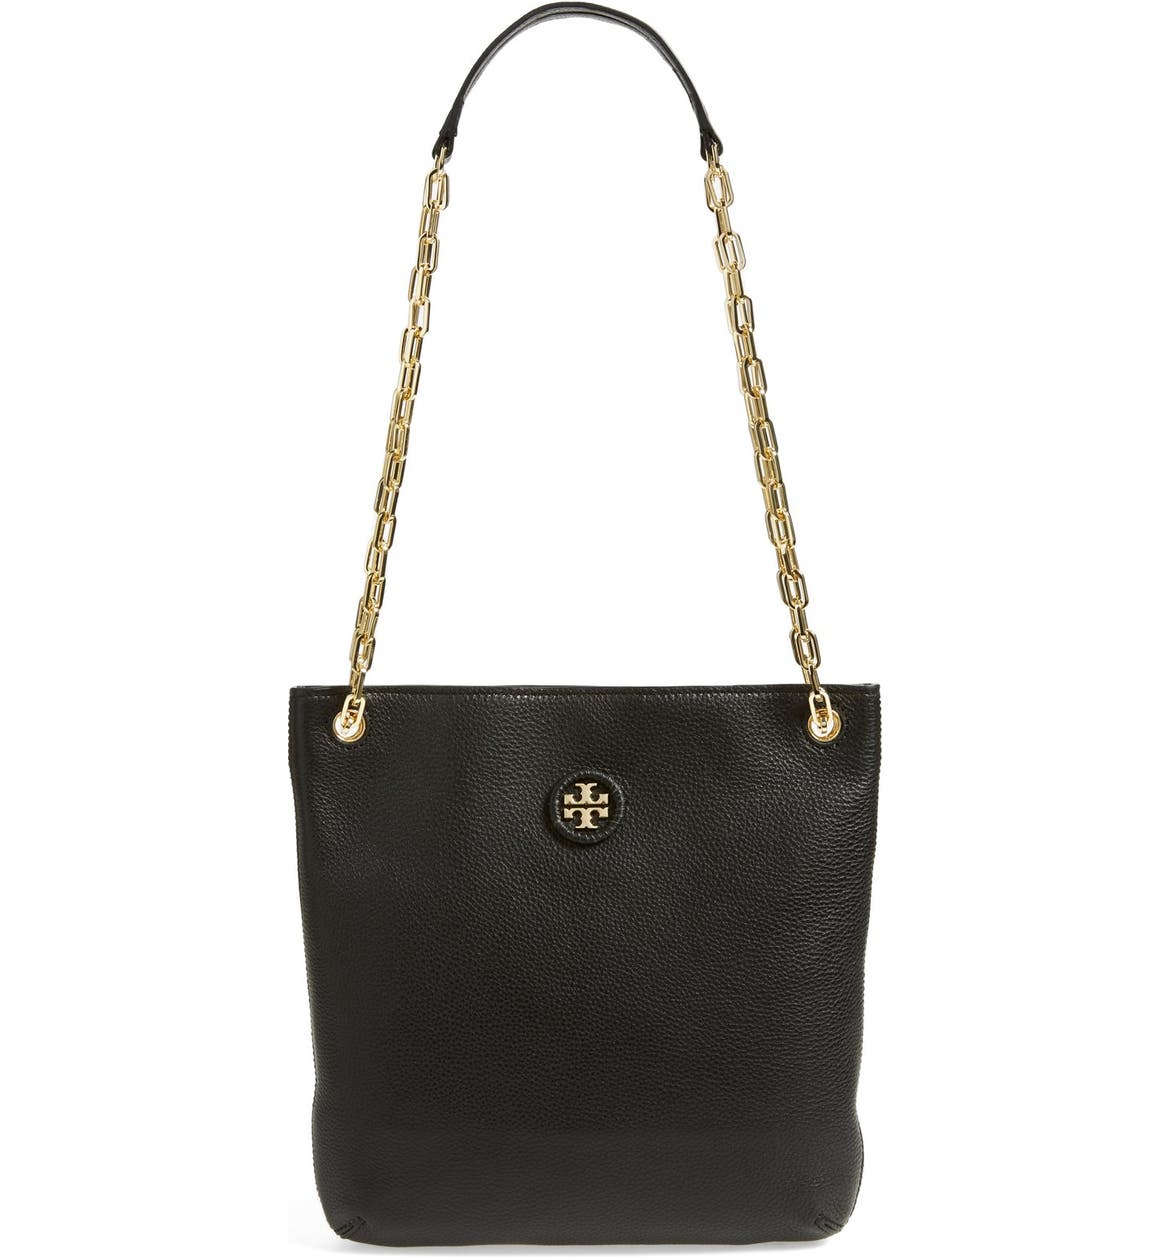 Tory Burch Convertible Leather Crossbody Bag (Nordstrom Exclusive